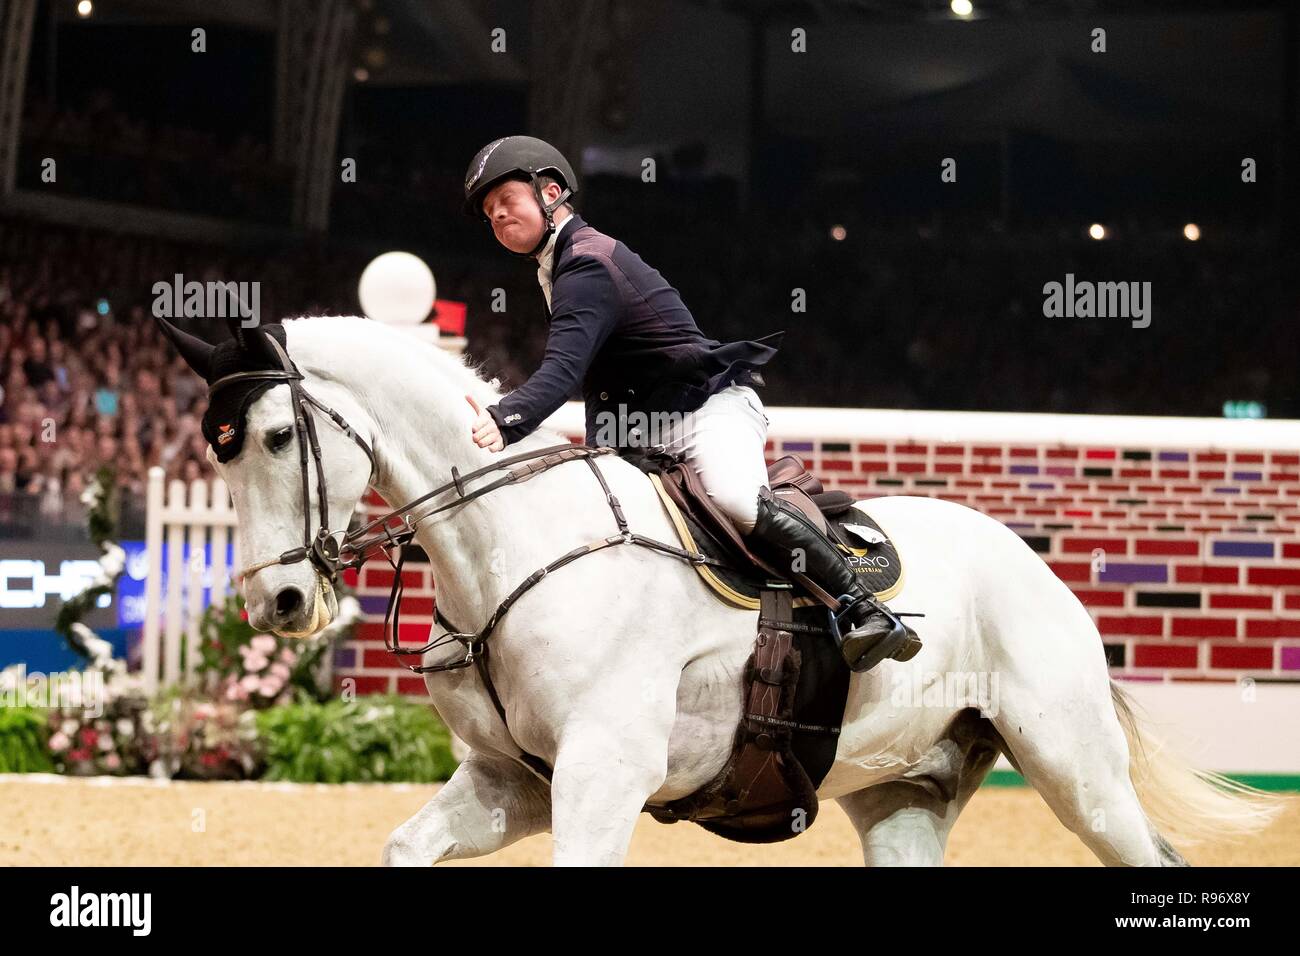 London, UK. 20th December, 2018. Alfie Bradstock riding H. d'Or. GBR. Puissance. Showjumping. Olympia. The London International Horse Show. London. UK. Credit: Sport In Pictures/Alamy Live News Stock Photo